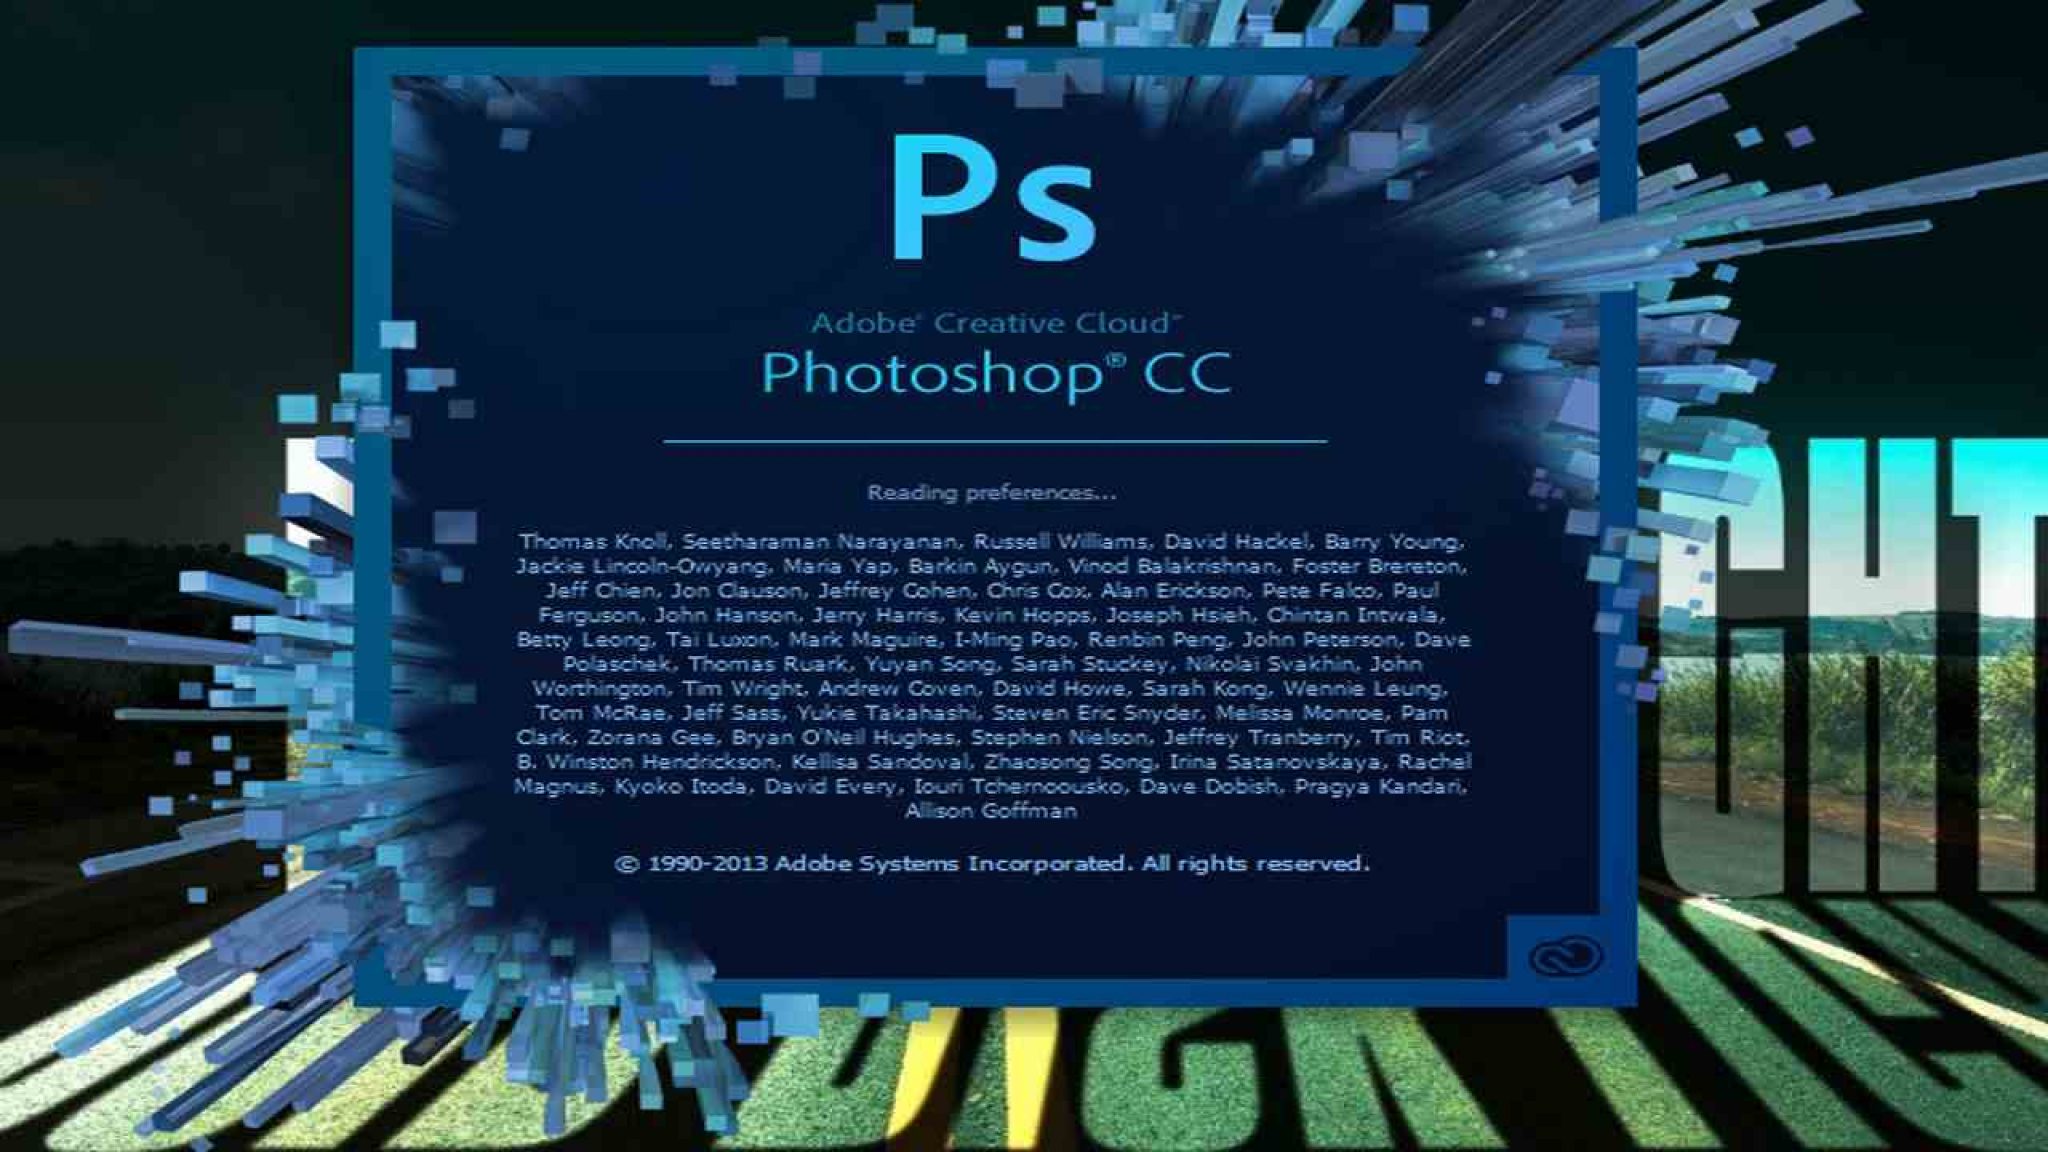 adobe photoshop ps free download for windows 7 64 bit